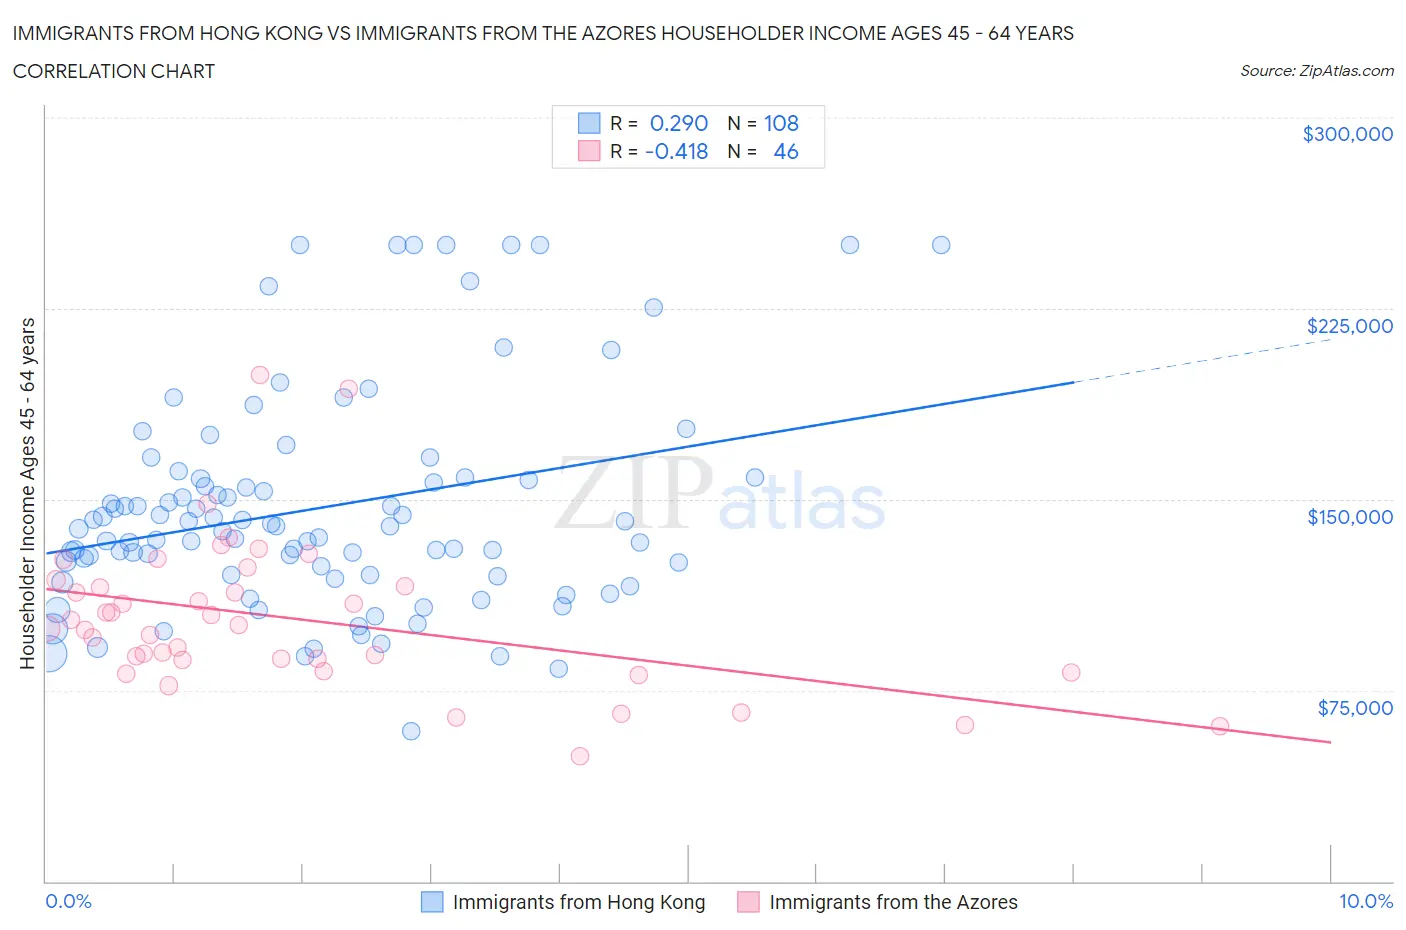 Immigrants from Hong Kong vs Immigrants from the Azores Householder Income Ages 45 - 64 years